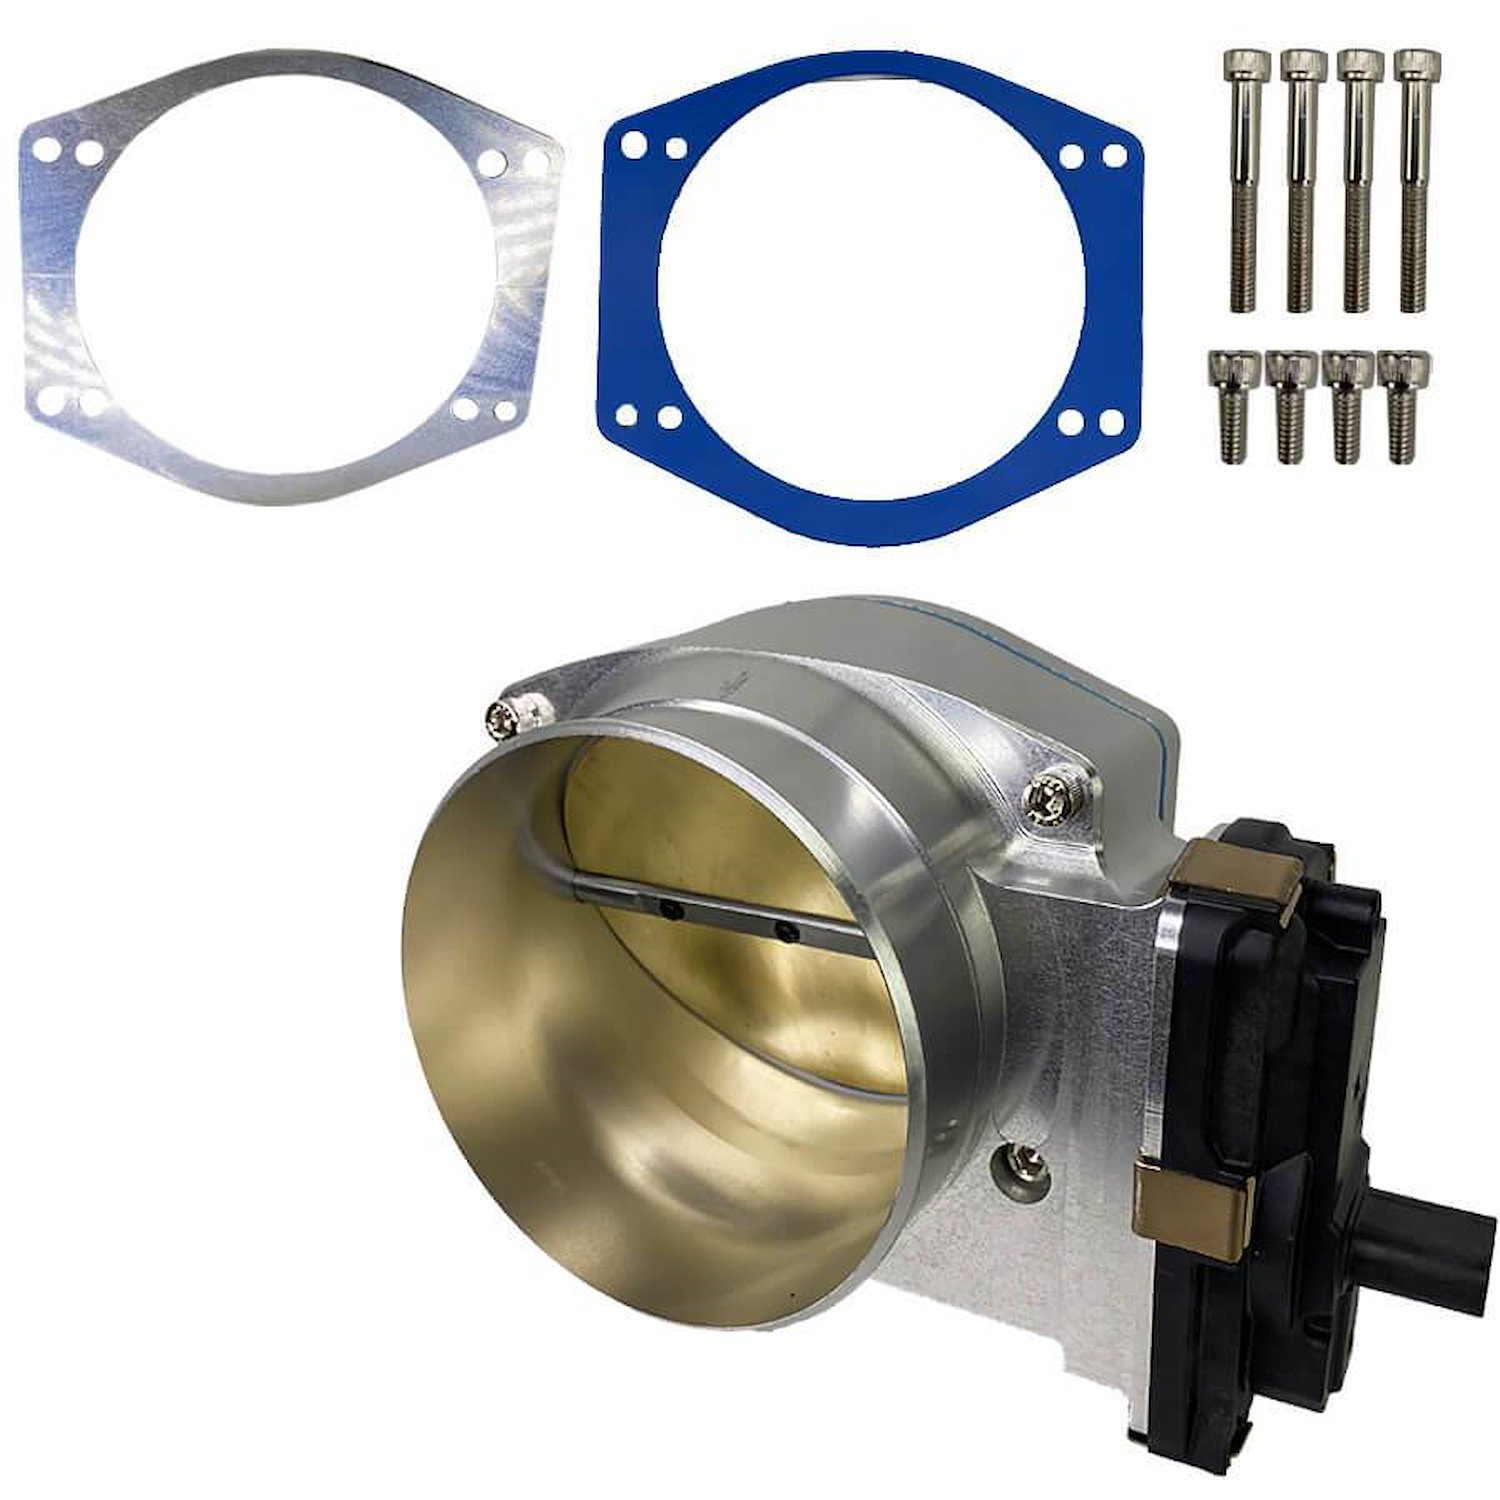 Drive-By-Wire Throttle Body GM LT1/LT4, 112 mm - Polished Finish